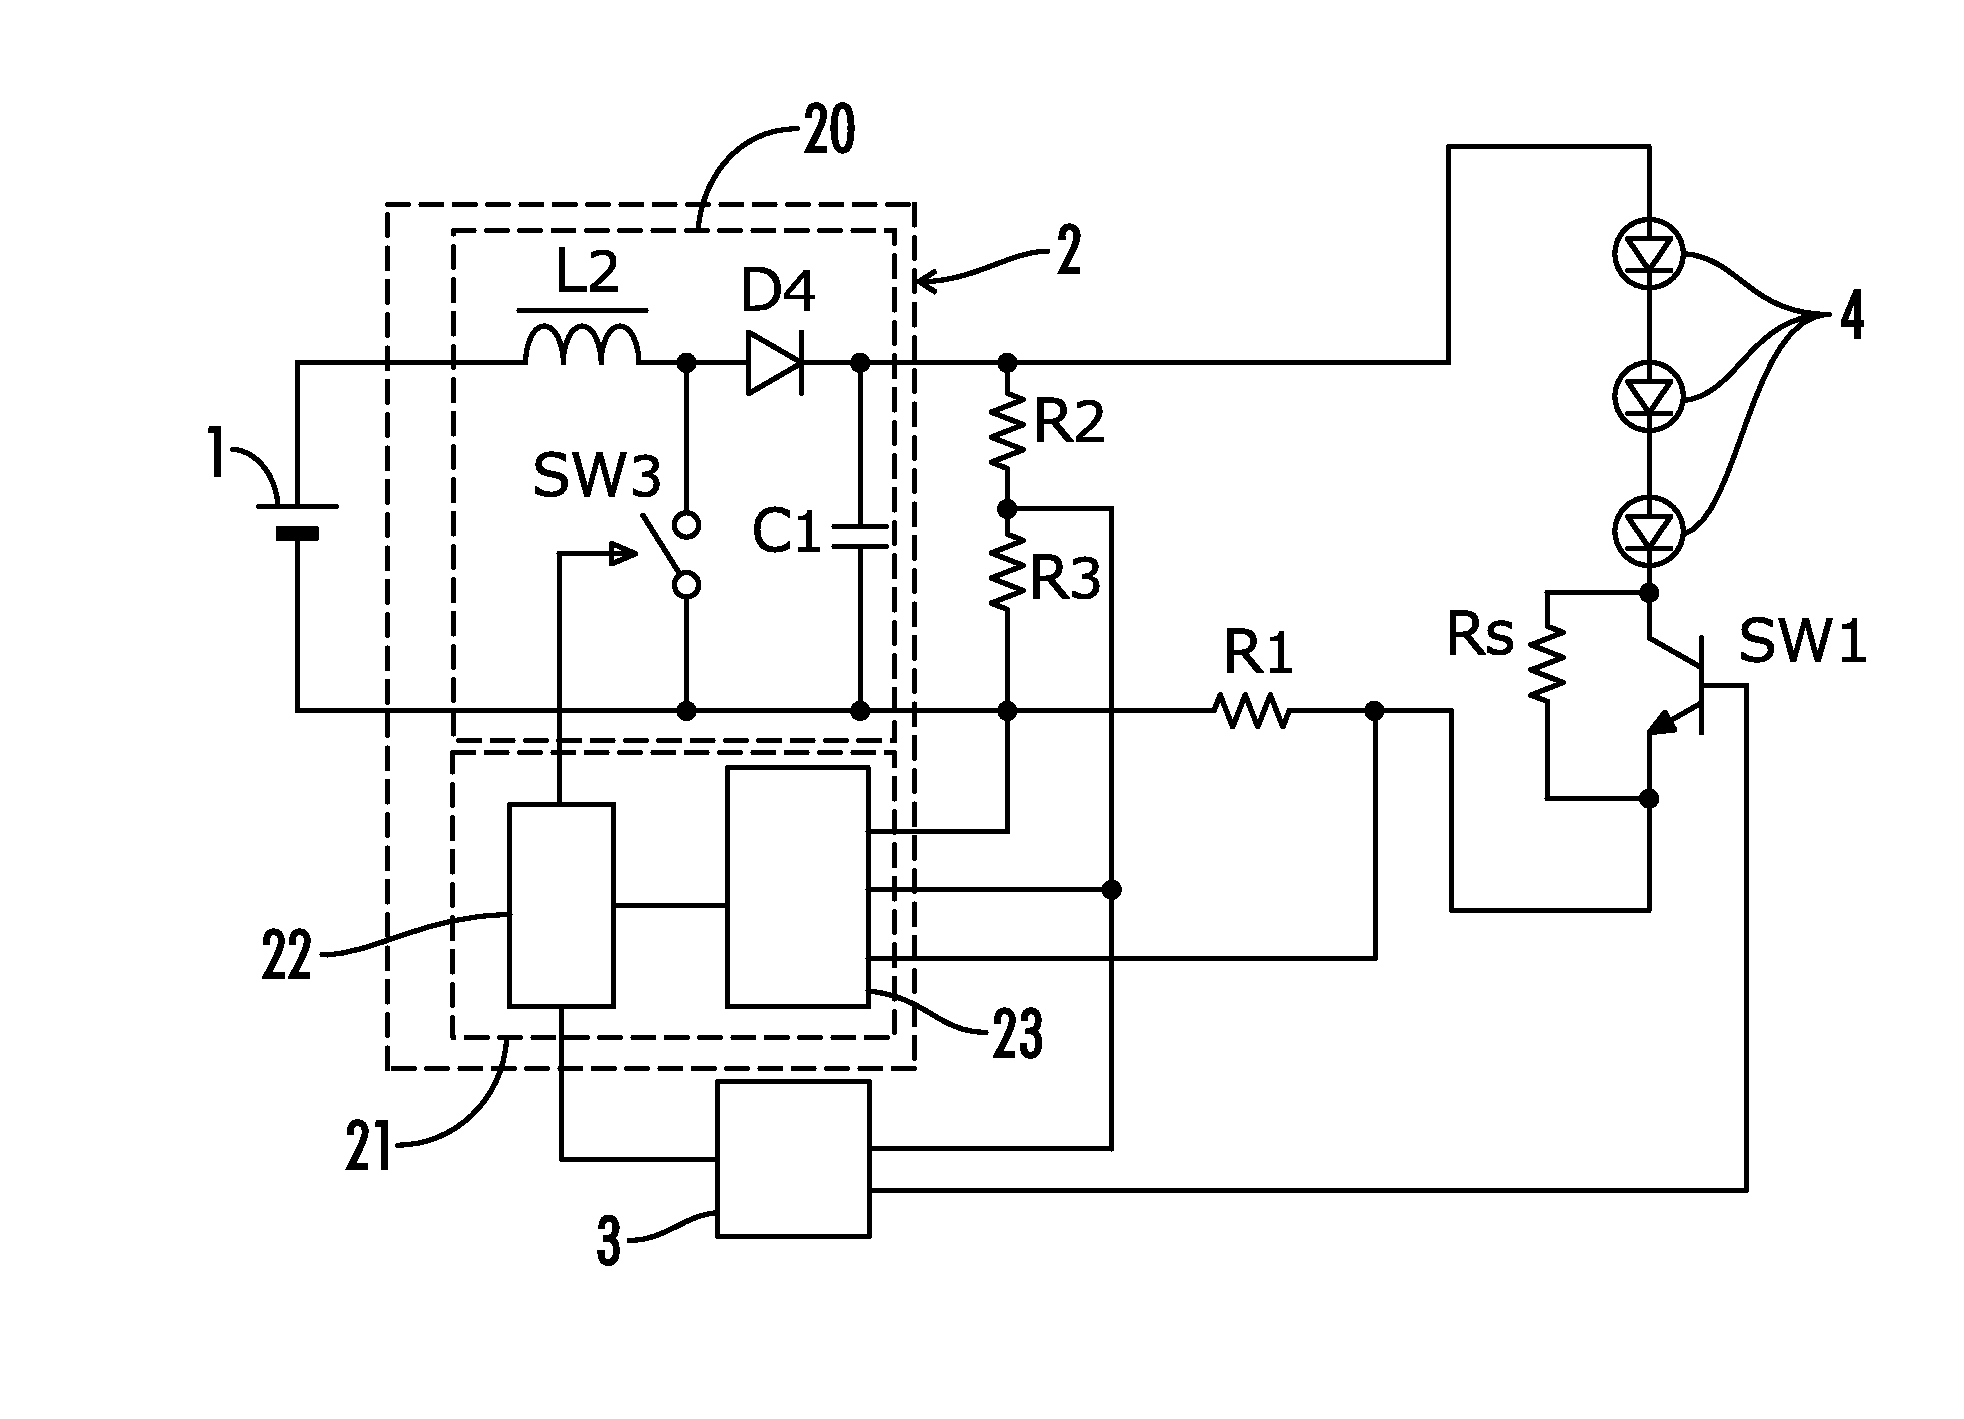 LED driver circuit with over-current protection during a short circuit condition